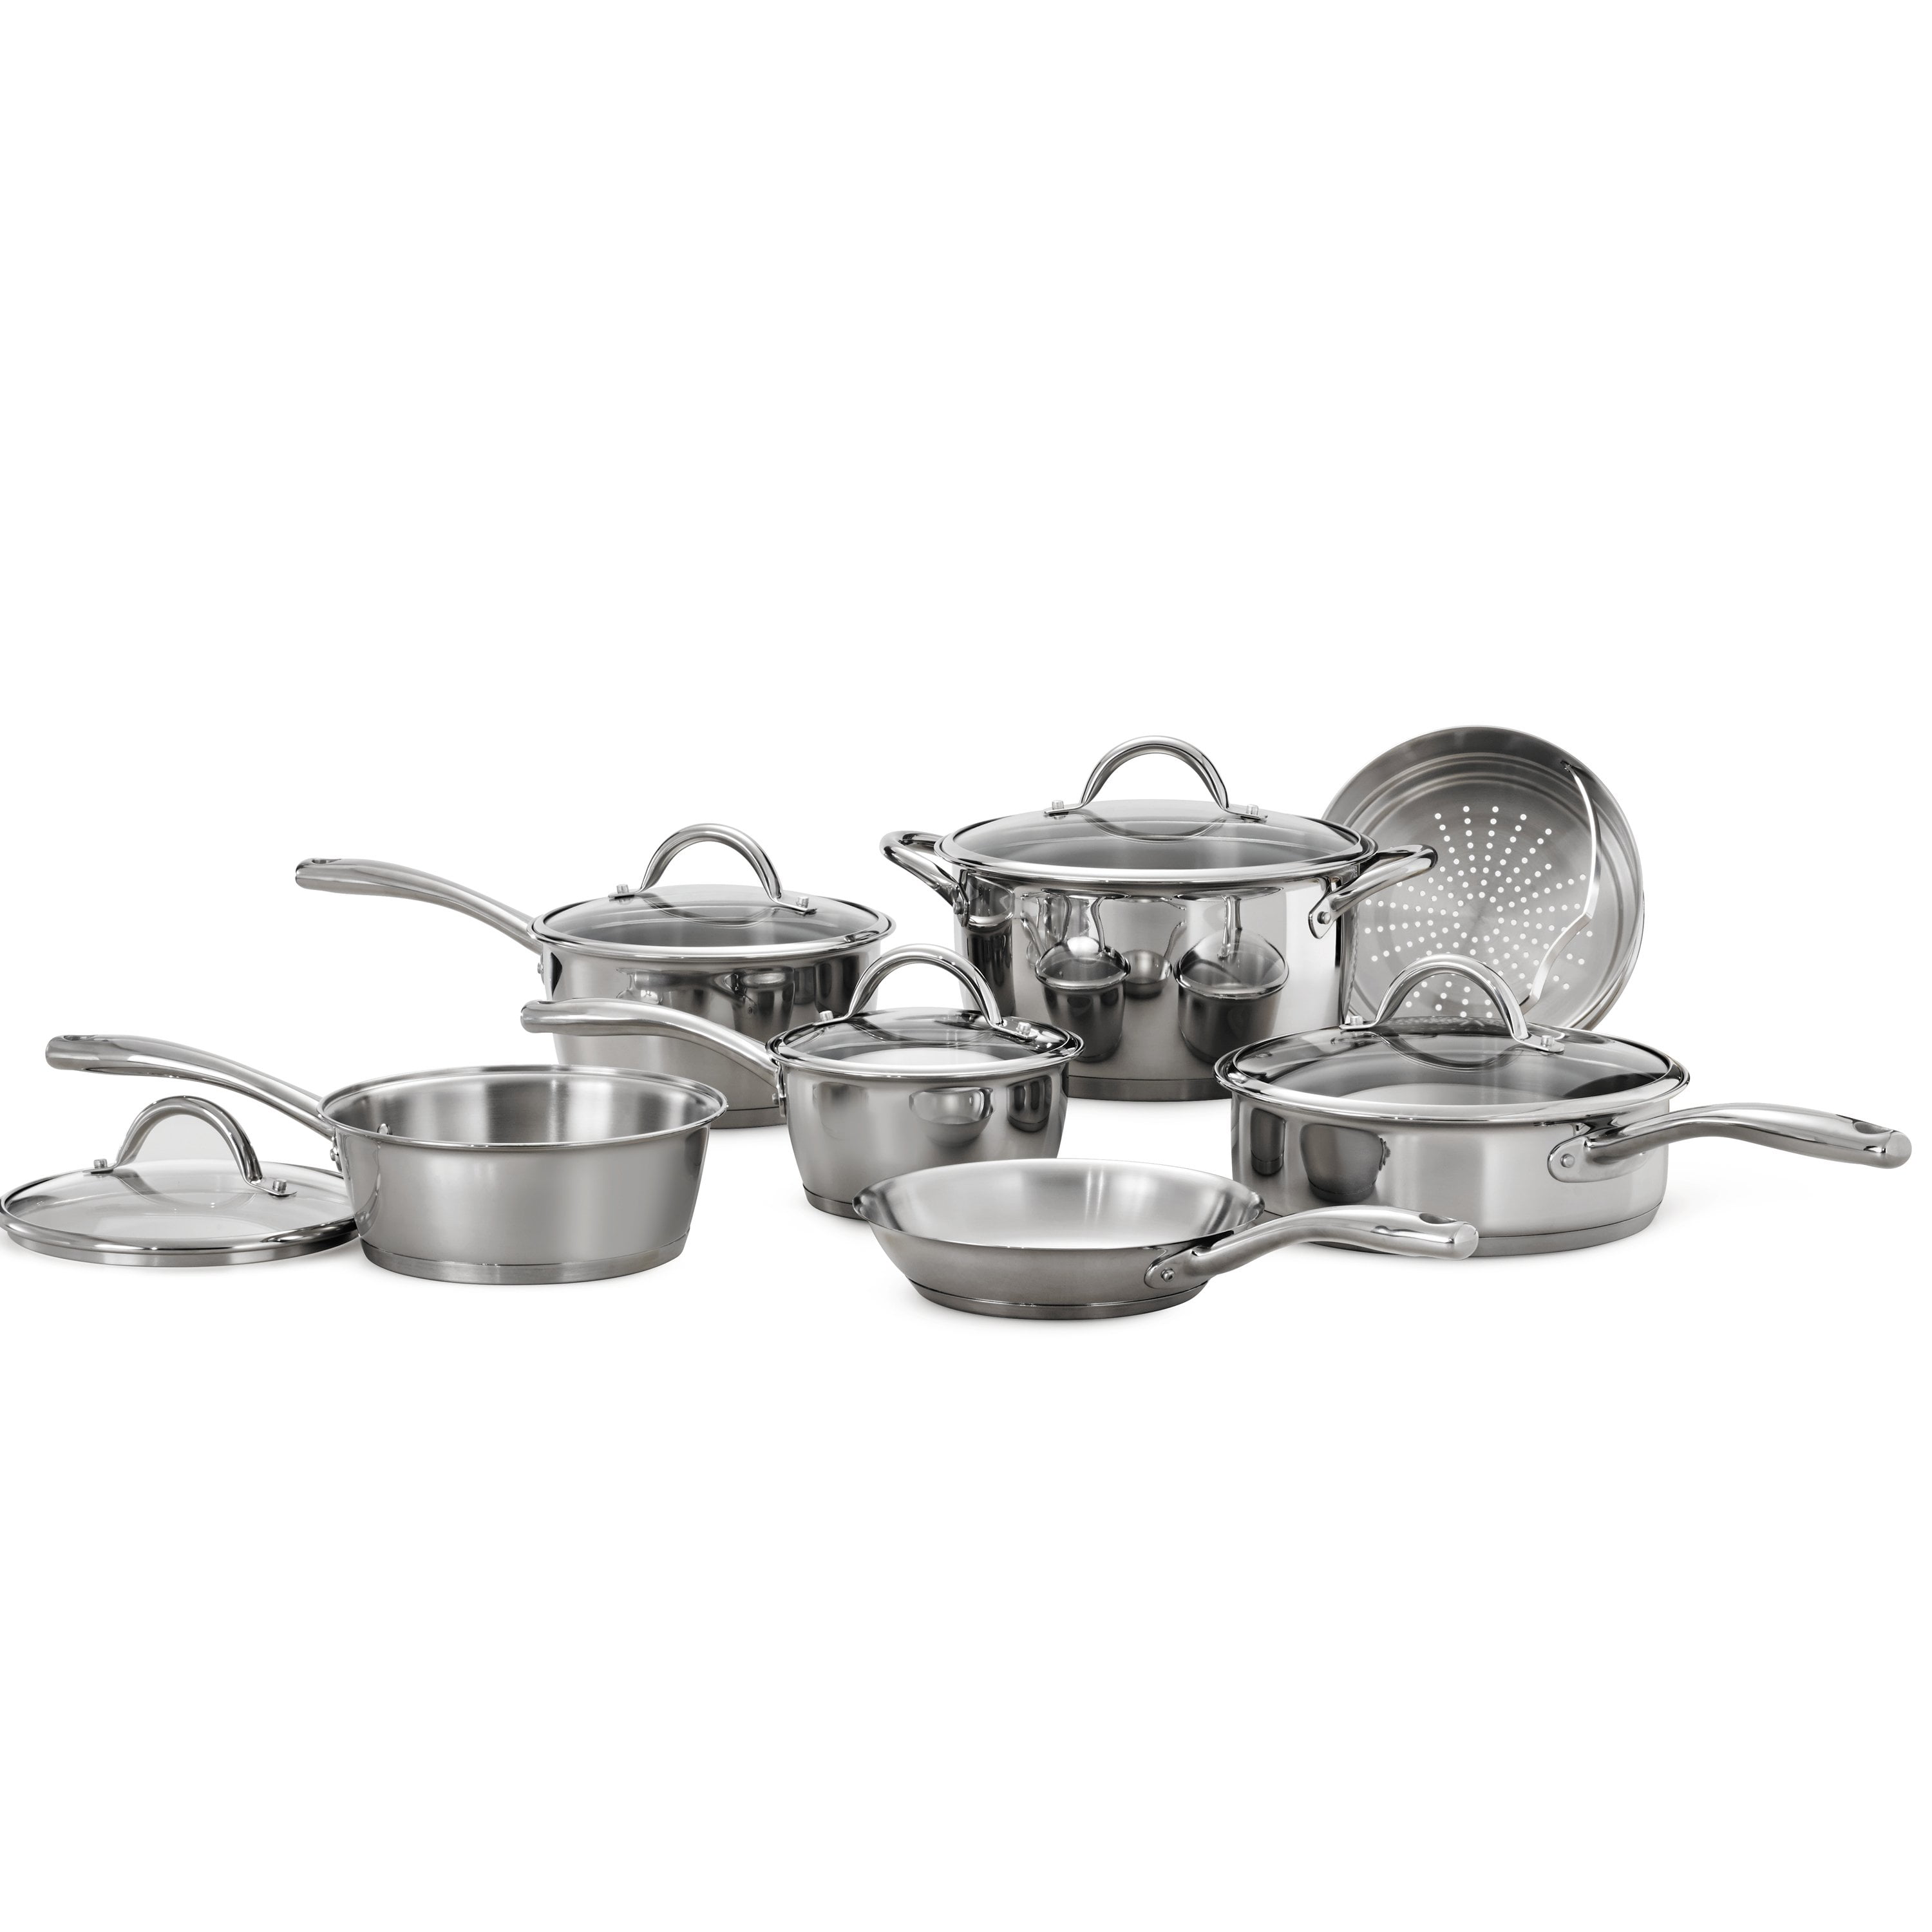 Tramontina Gourmet Stainless Steel Tri-Ply Base Cookware Set, 12 Piece Tramontina Gourmet Stainless Steel Tri Ply Base Cookware Set